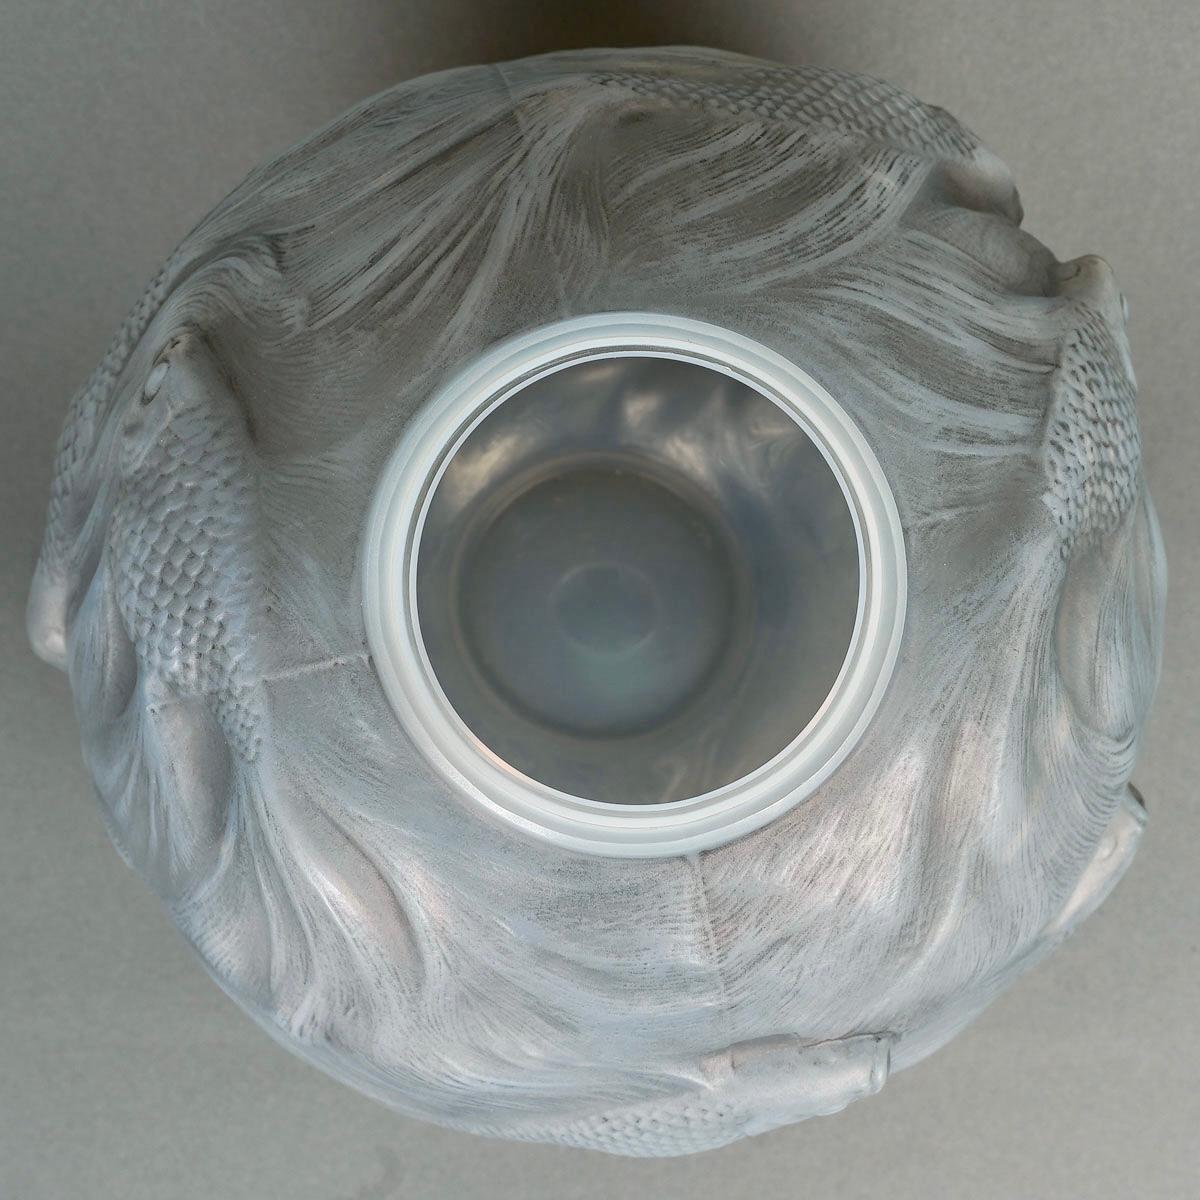 French 1924 Rene Lalique, Vase Formose Cased Opalescent Glass with Grey Patina